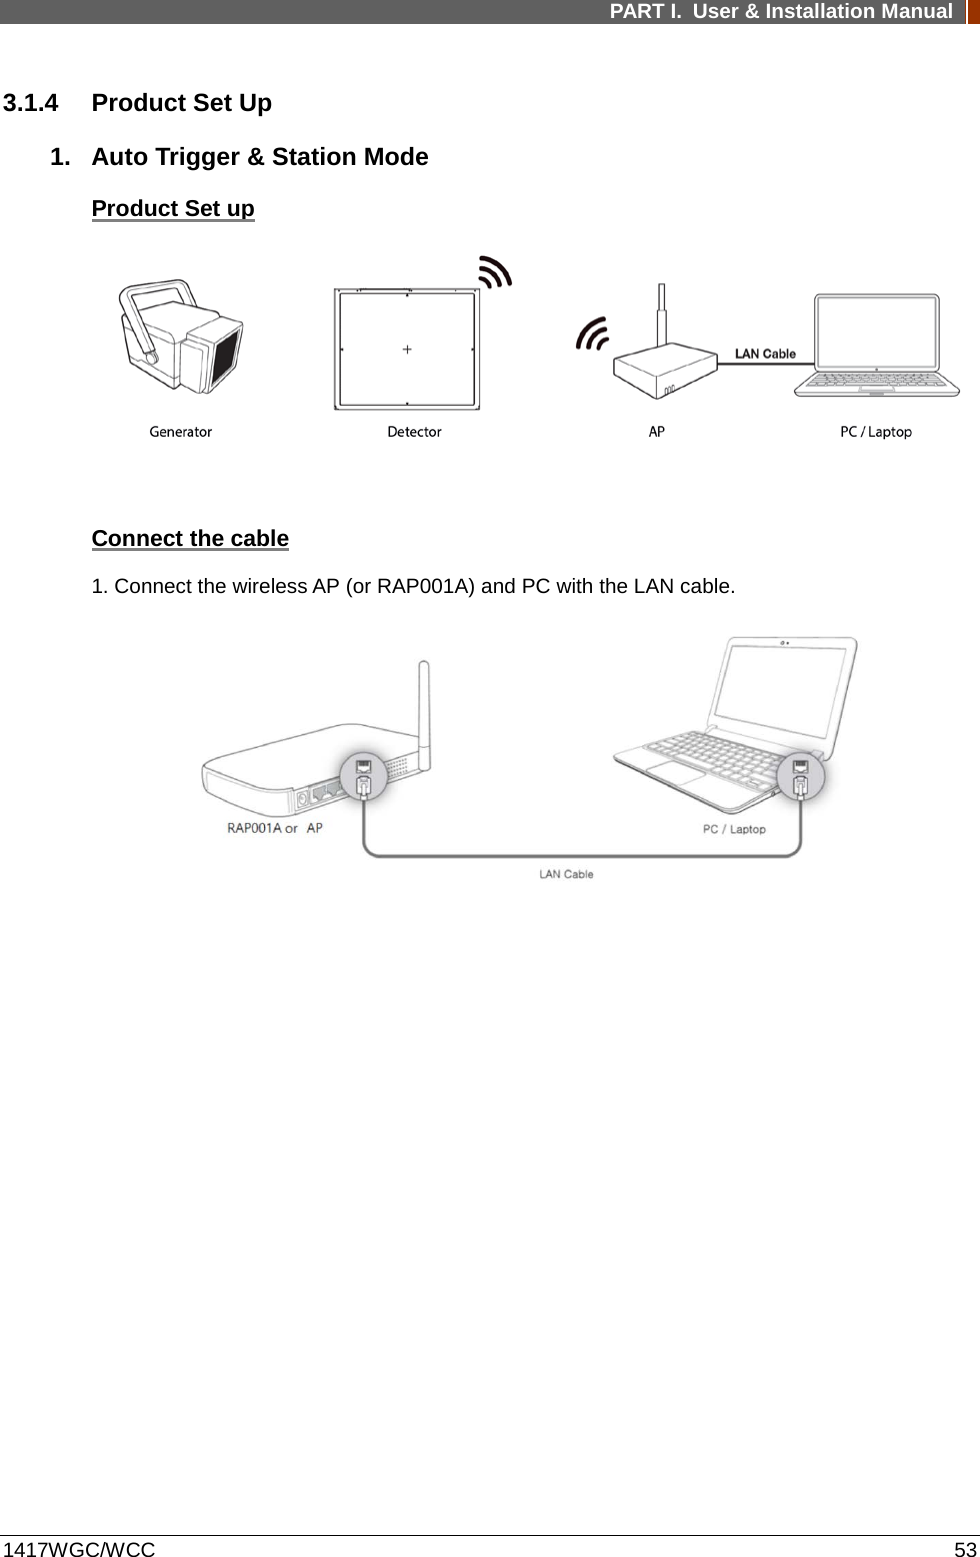 PART I. User &amp; Installation Manual  1417WGC/WCC 53 3.1.4 Product Set Up 1. Auto Trigger &amp; Station Mode Product Set up     Connect the cable 1. Connect the wireless AP (or RAP001A) and PC with the LAN cable.     